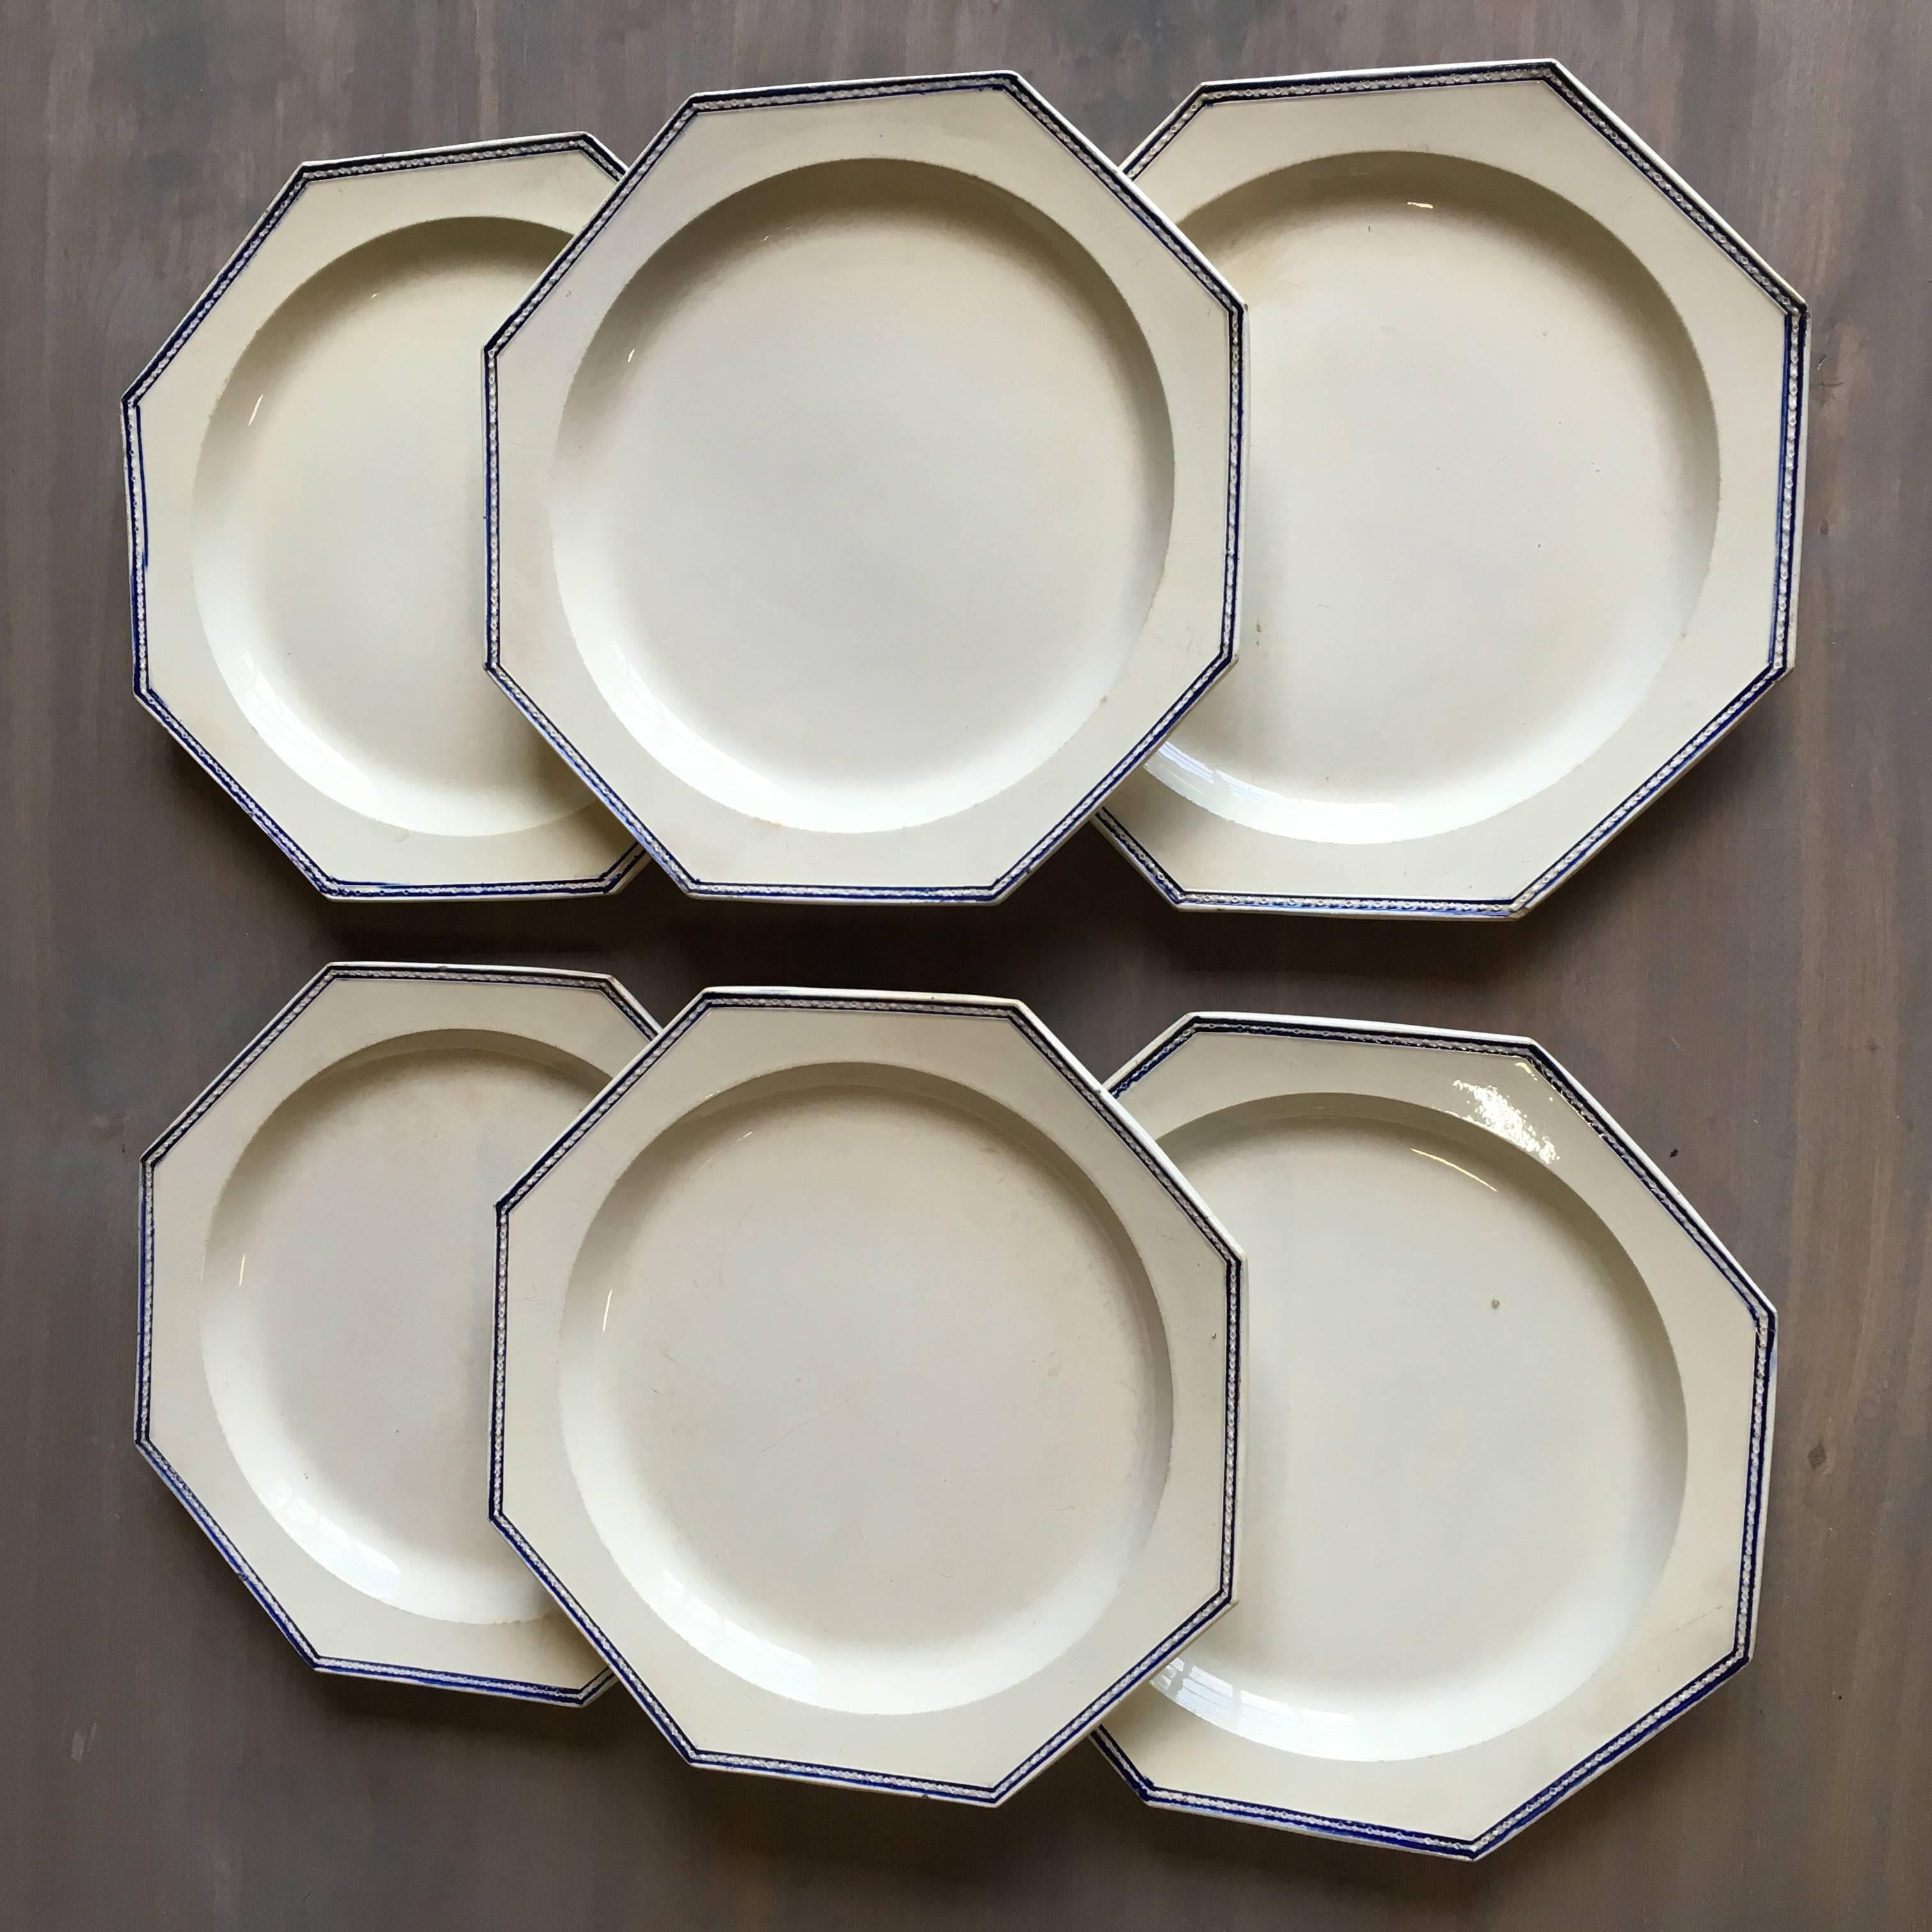 A rare set of six Creil octagonal plates with blue trim, circa 1810, in great condition, stamped "Creil" on bottoms.